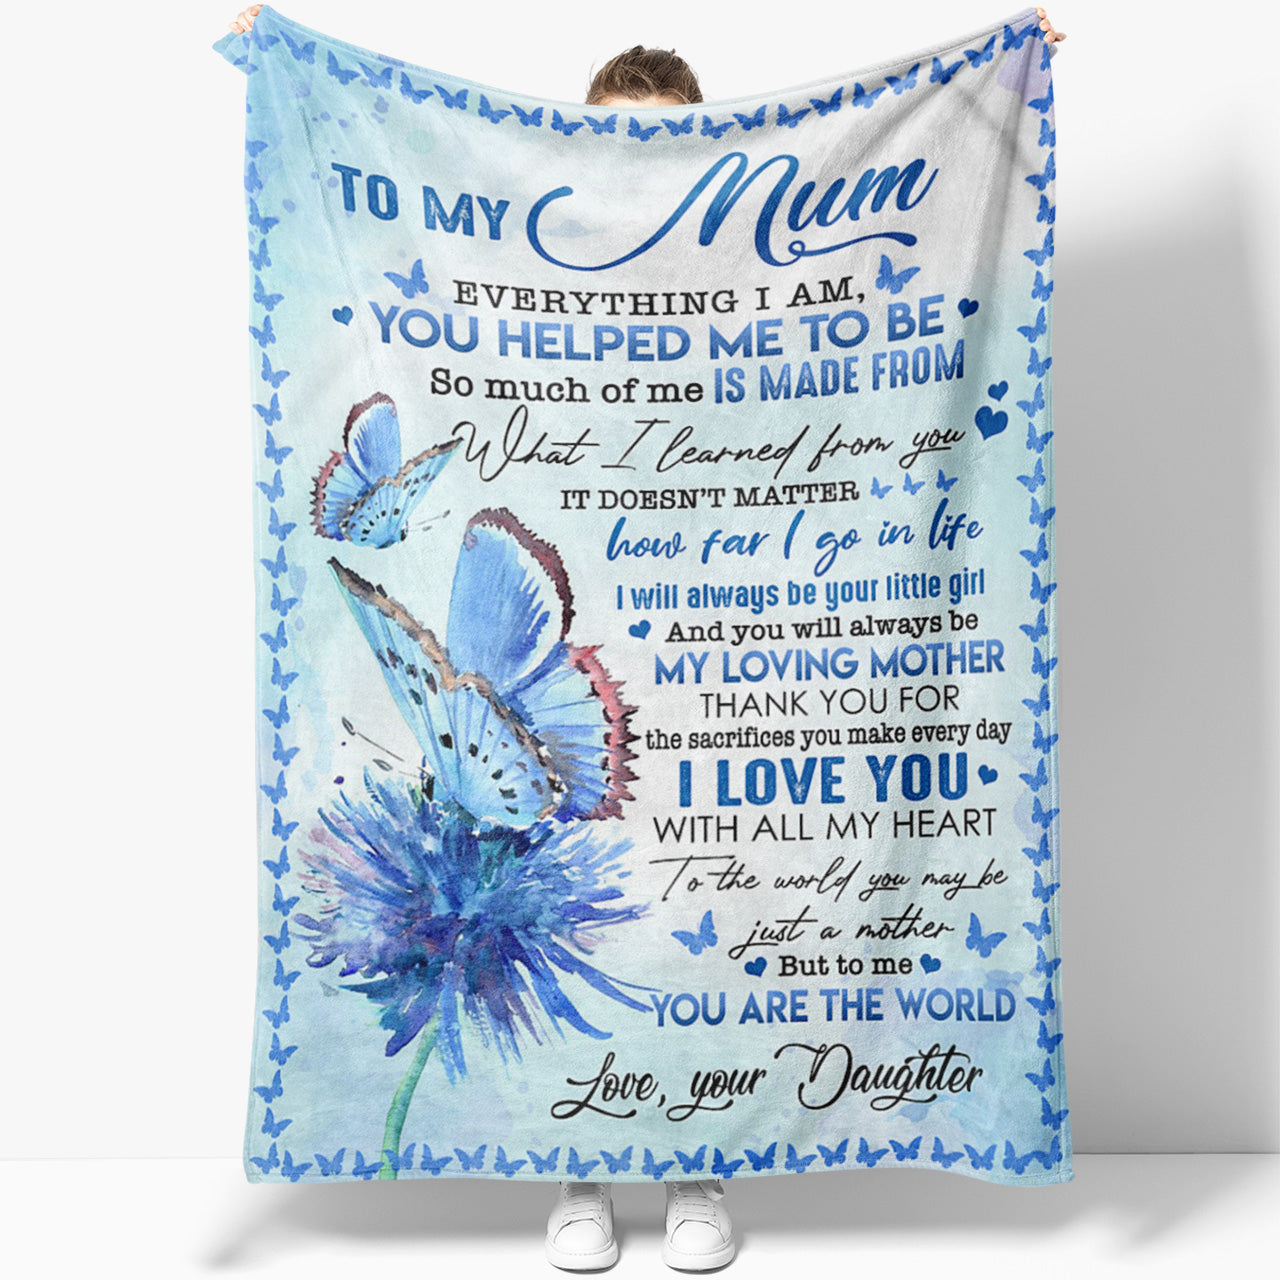 23 of the Best Birthday Gift Ideas for Mom from Daughter